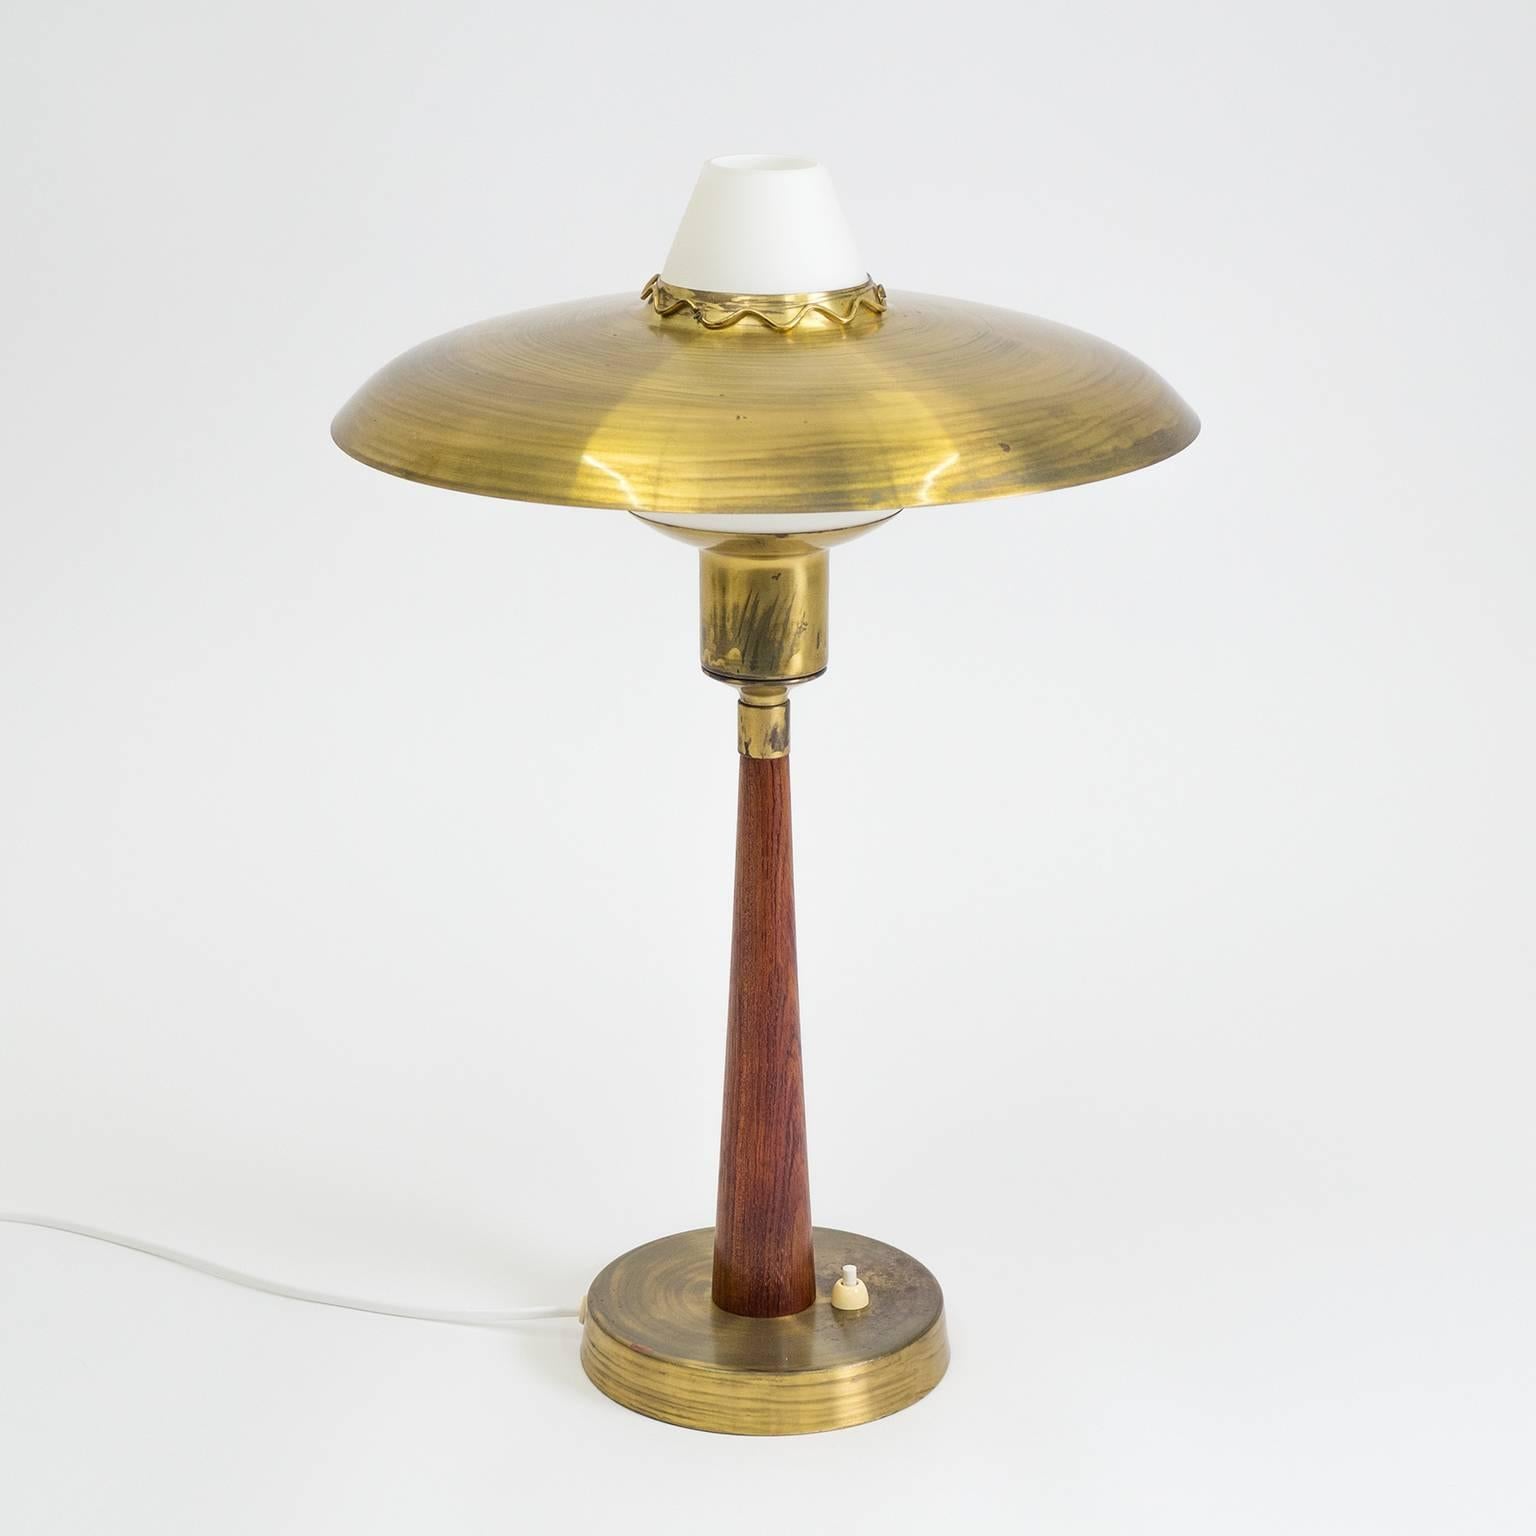 Lovely midcentury table or desk lamp from Sweden in a combination of brass, teak and satin glass. The weighted brass base holds a solid teak stem which culminates in a cased satin glass diffuser, atop of which rests a large brass shade with a